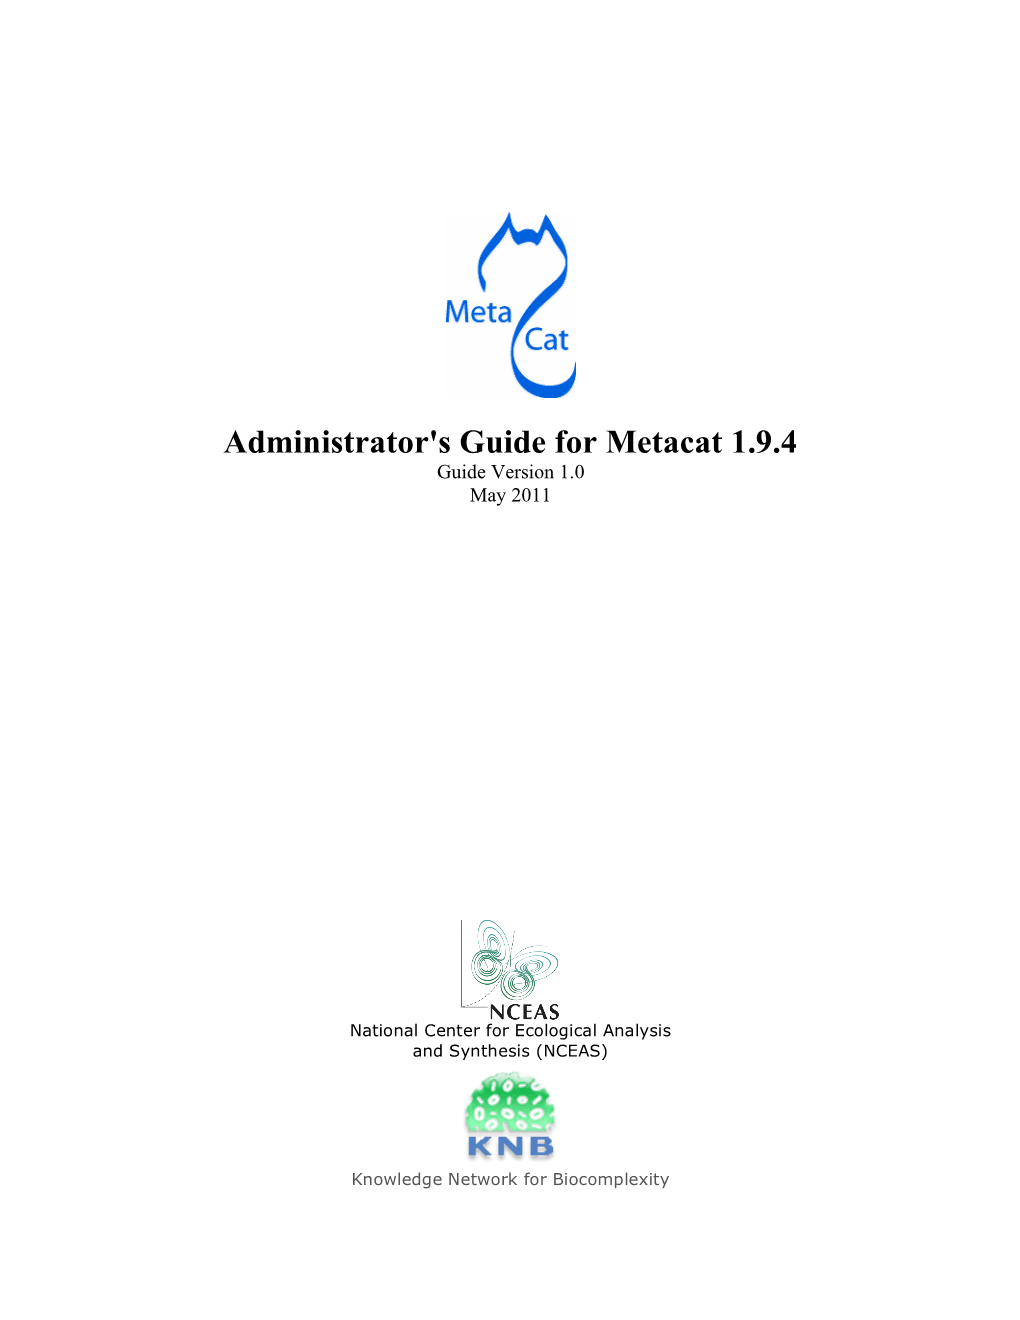 Administrator's Guide for Metacat 1.9.4 Guide Version 1.0 May 2011